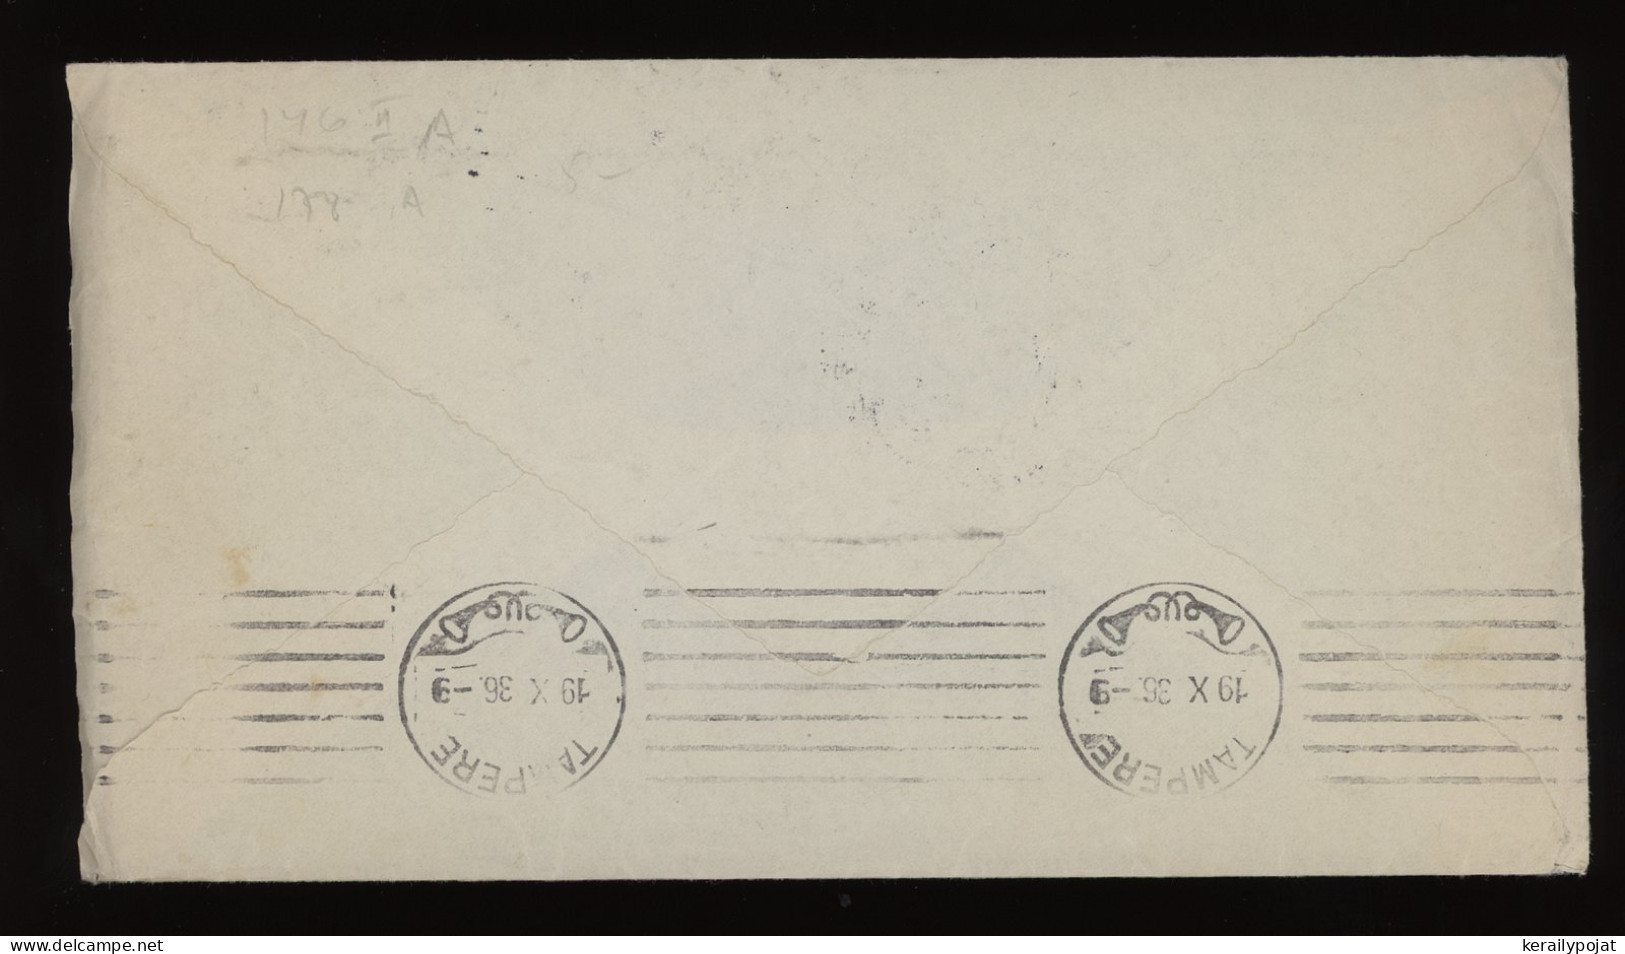 Sweden 1936 Stockholm Air Mail Cover To Finland__(12251) - Lettres & Documents